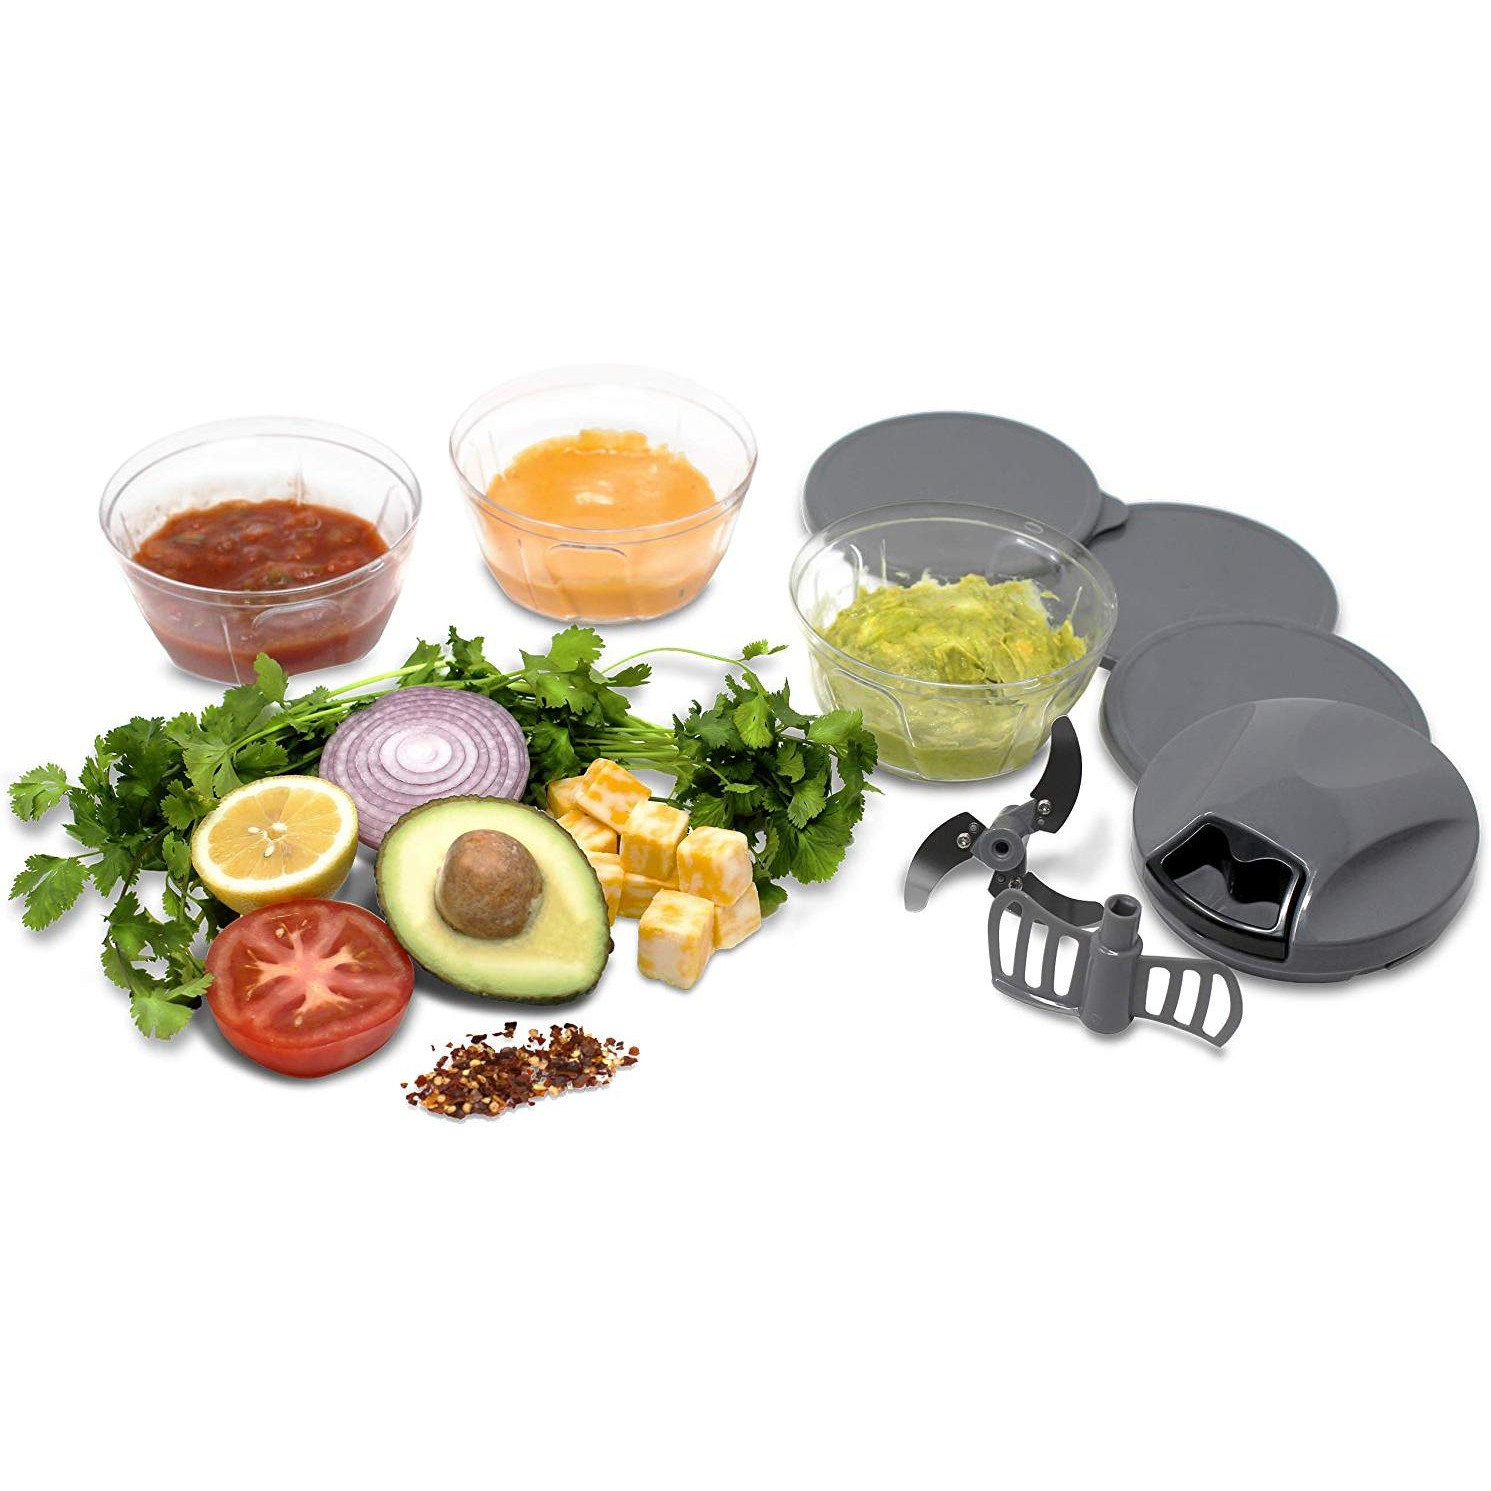 Tribowl Apache, Hand Powered Manual Pull Cord Food Chopper Speedy Crank Chop for Onion, Garlic, Nuts and Vegetables with extra bowls, lids + blender attachment